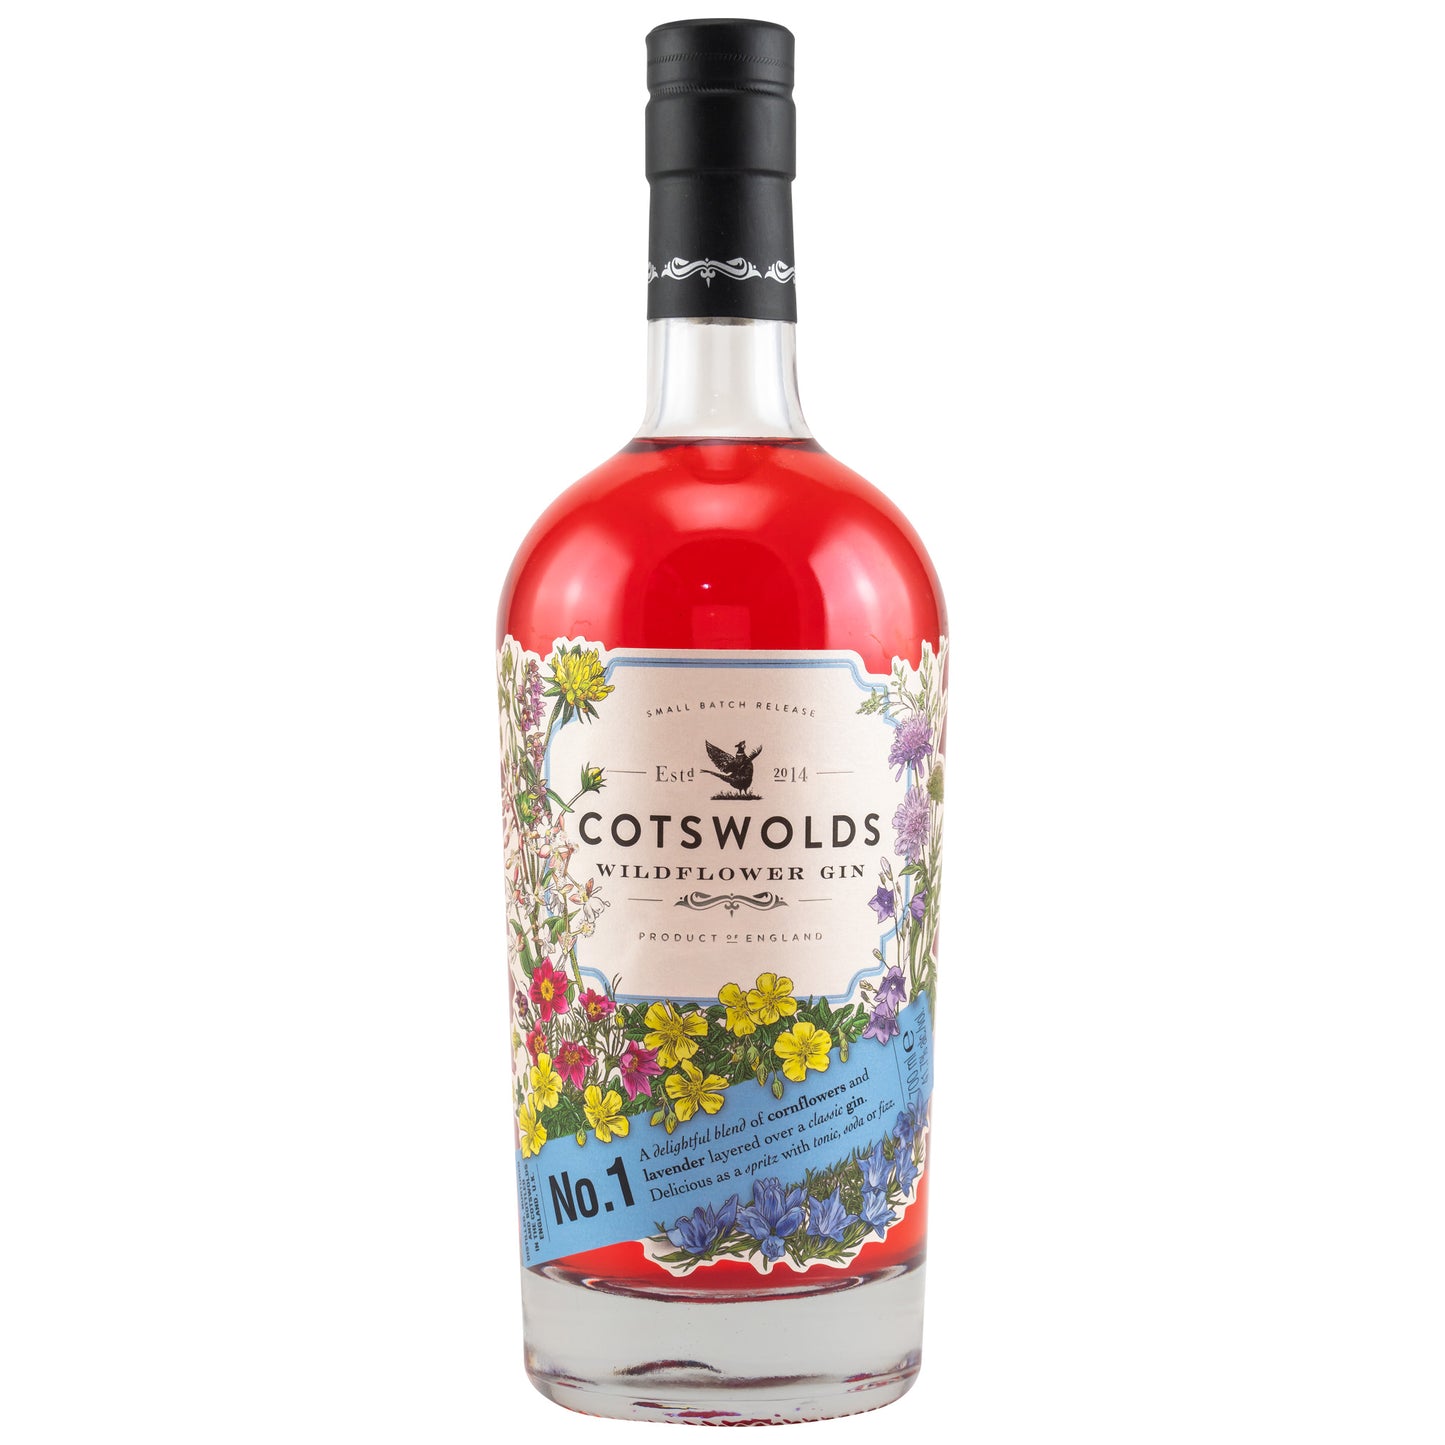 COTSWOLDS - Wildflower Gin No. 1 - 41,7% Vol.